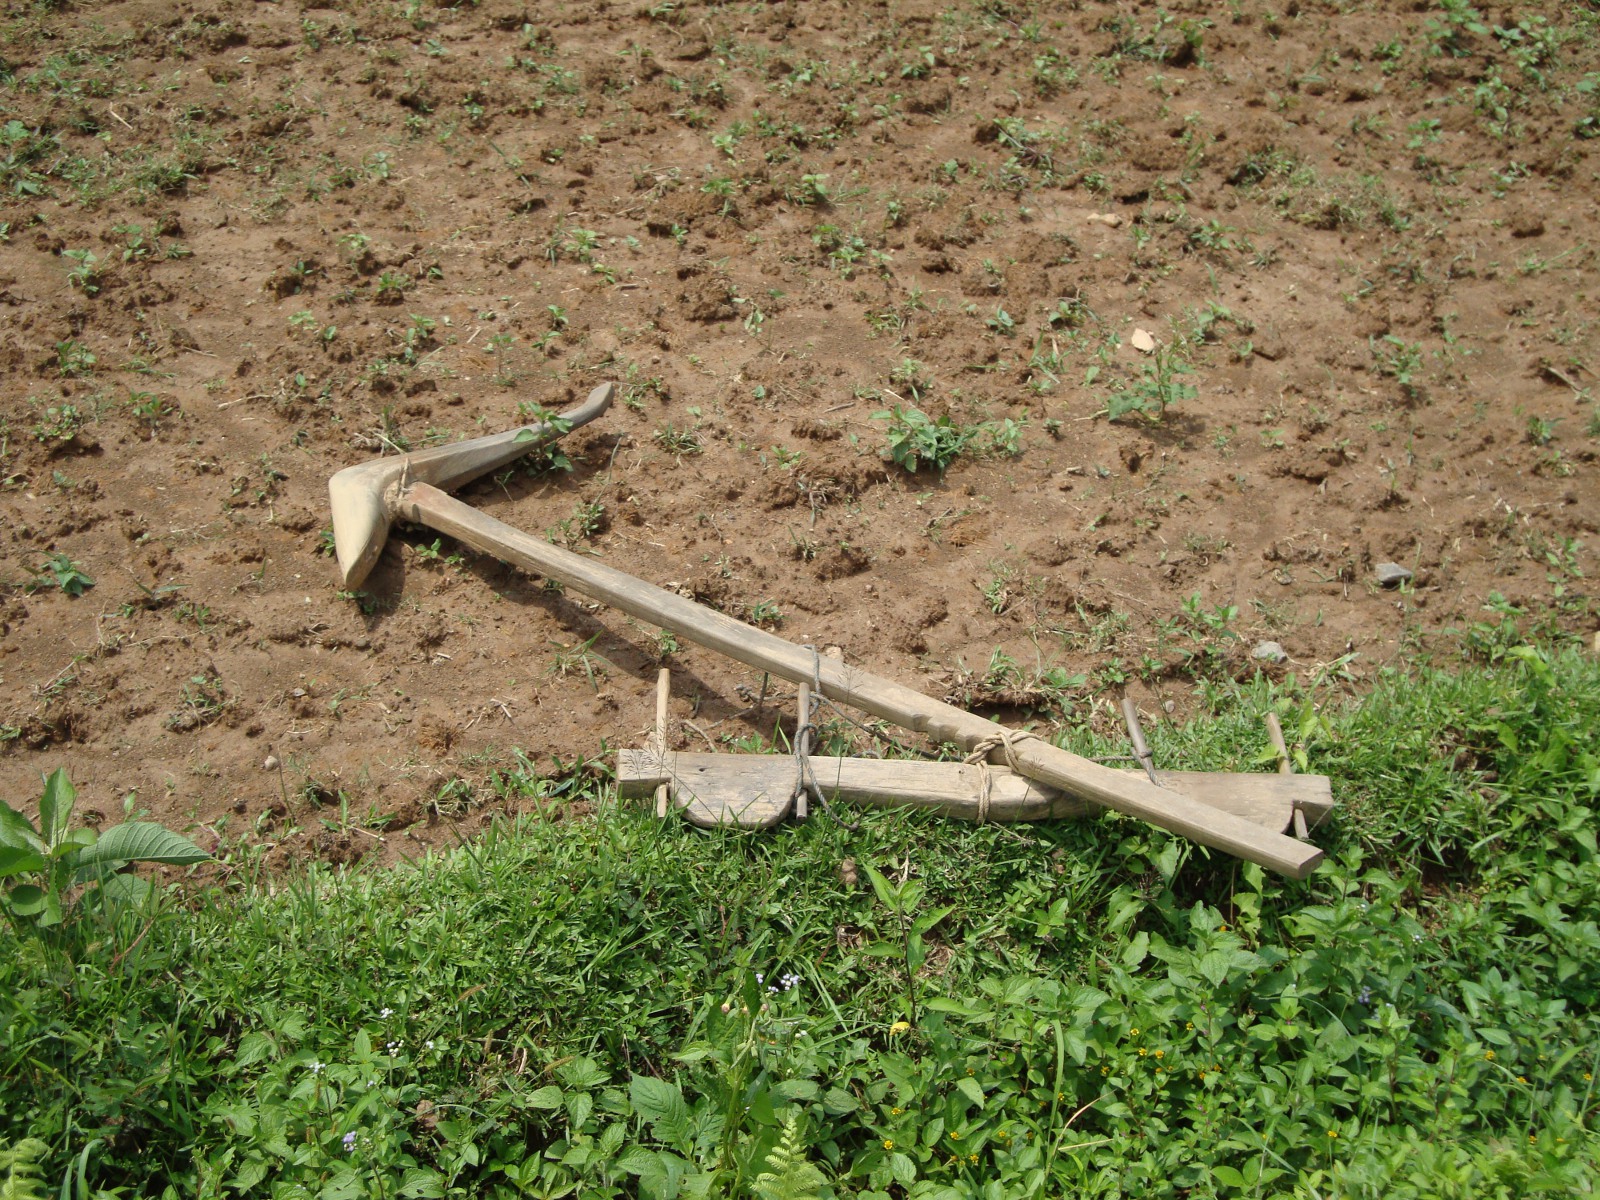 Old technologies never die: An ox-drawn plow used in the Garo Hills.